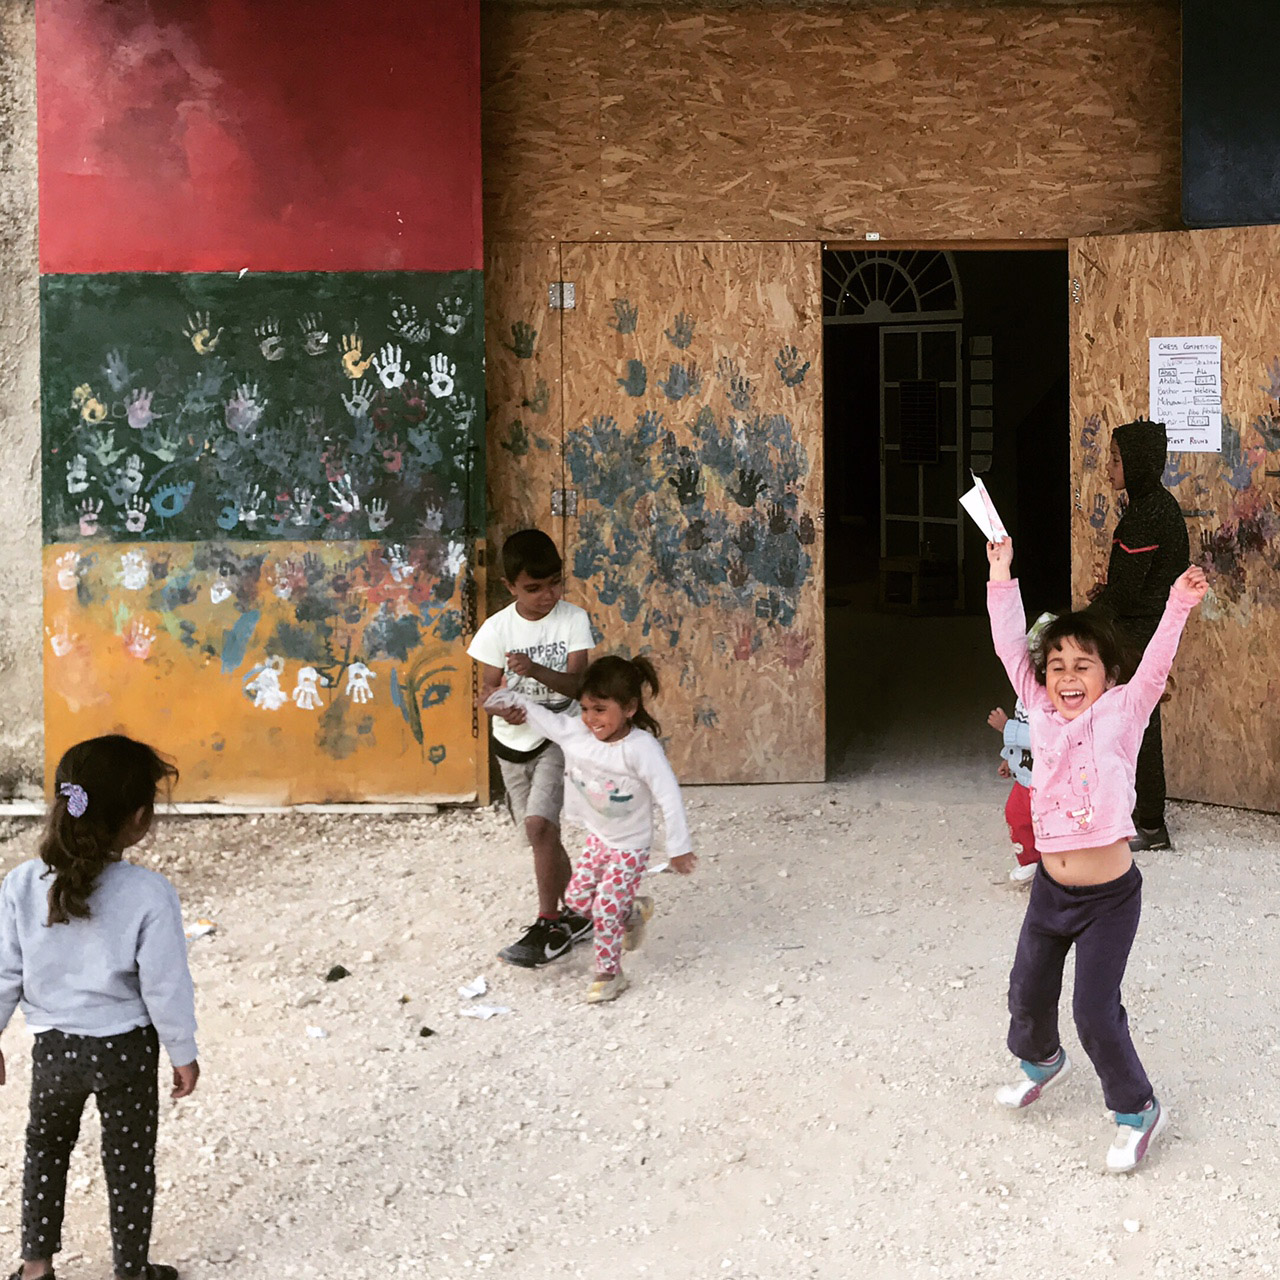 Children playing at Katsikas Camp in Greece in 2018. (Courtesy of Dina Nayeri)